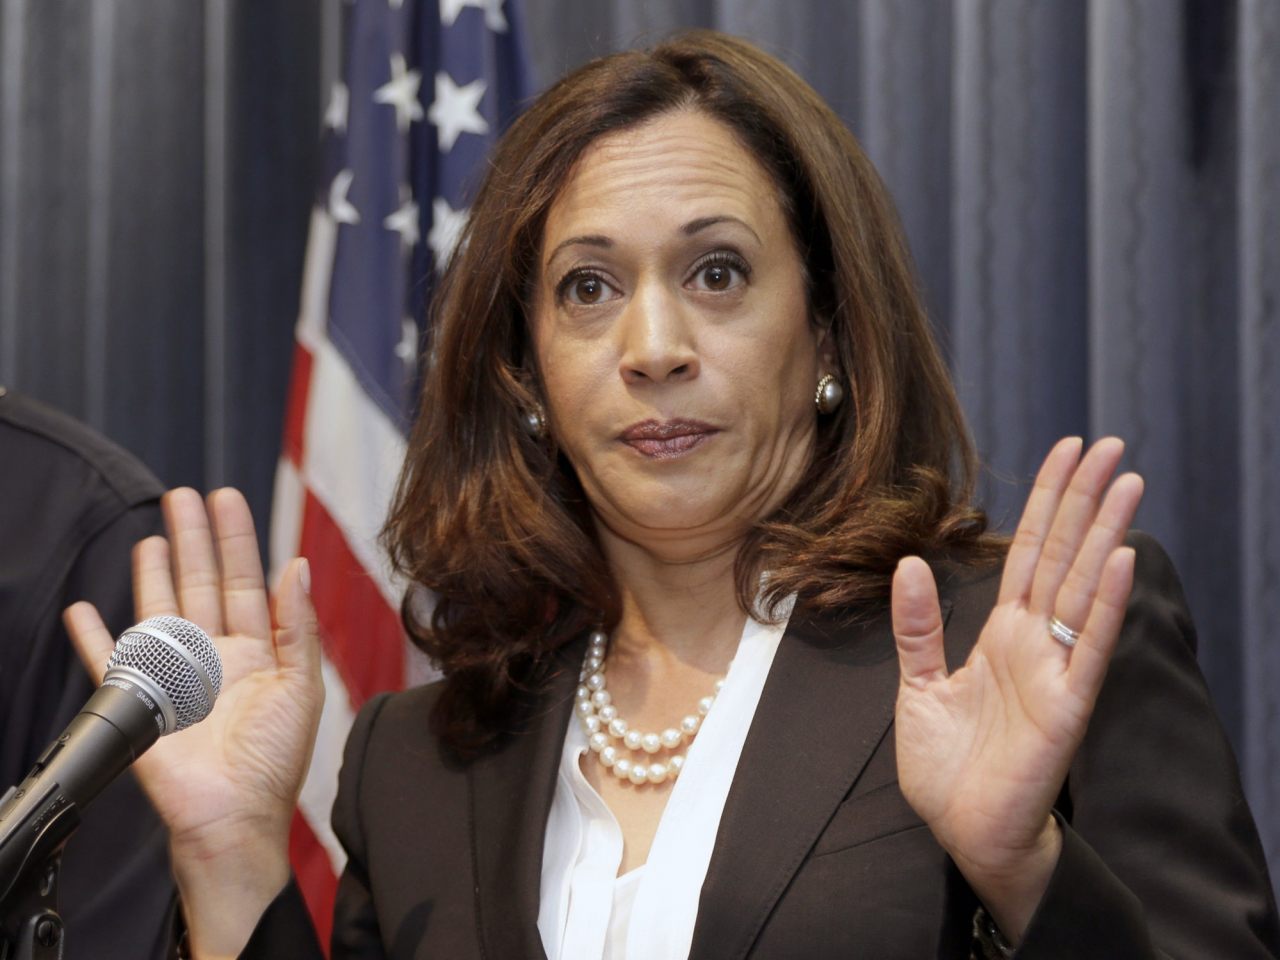 Image: Kamala Harris put in charge of “Ministry of Gender Truth” to harass anyone who doesn’t bow down to LGBT insanity